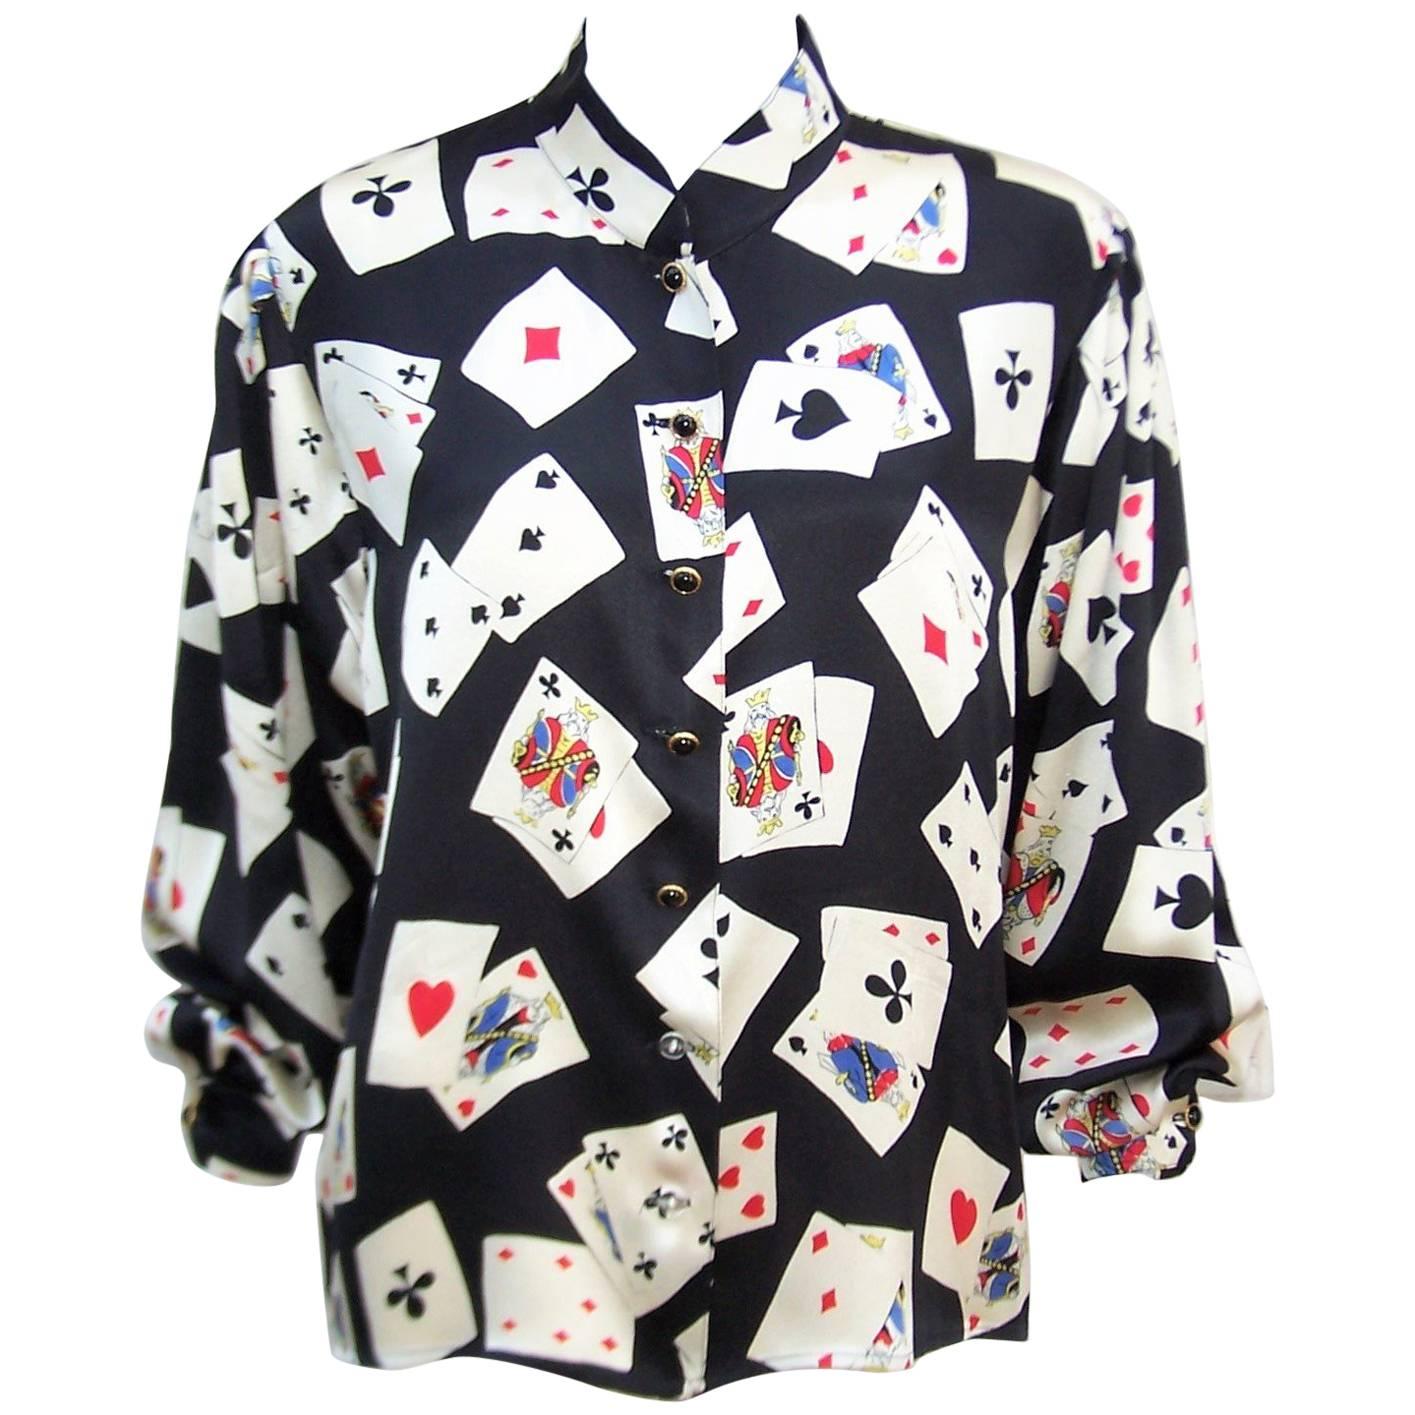 Fun 1980's Ungaro Silk Charmeuse Blouse With Playing Cards